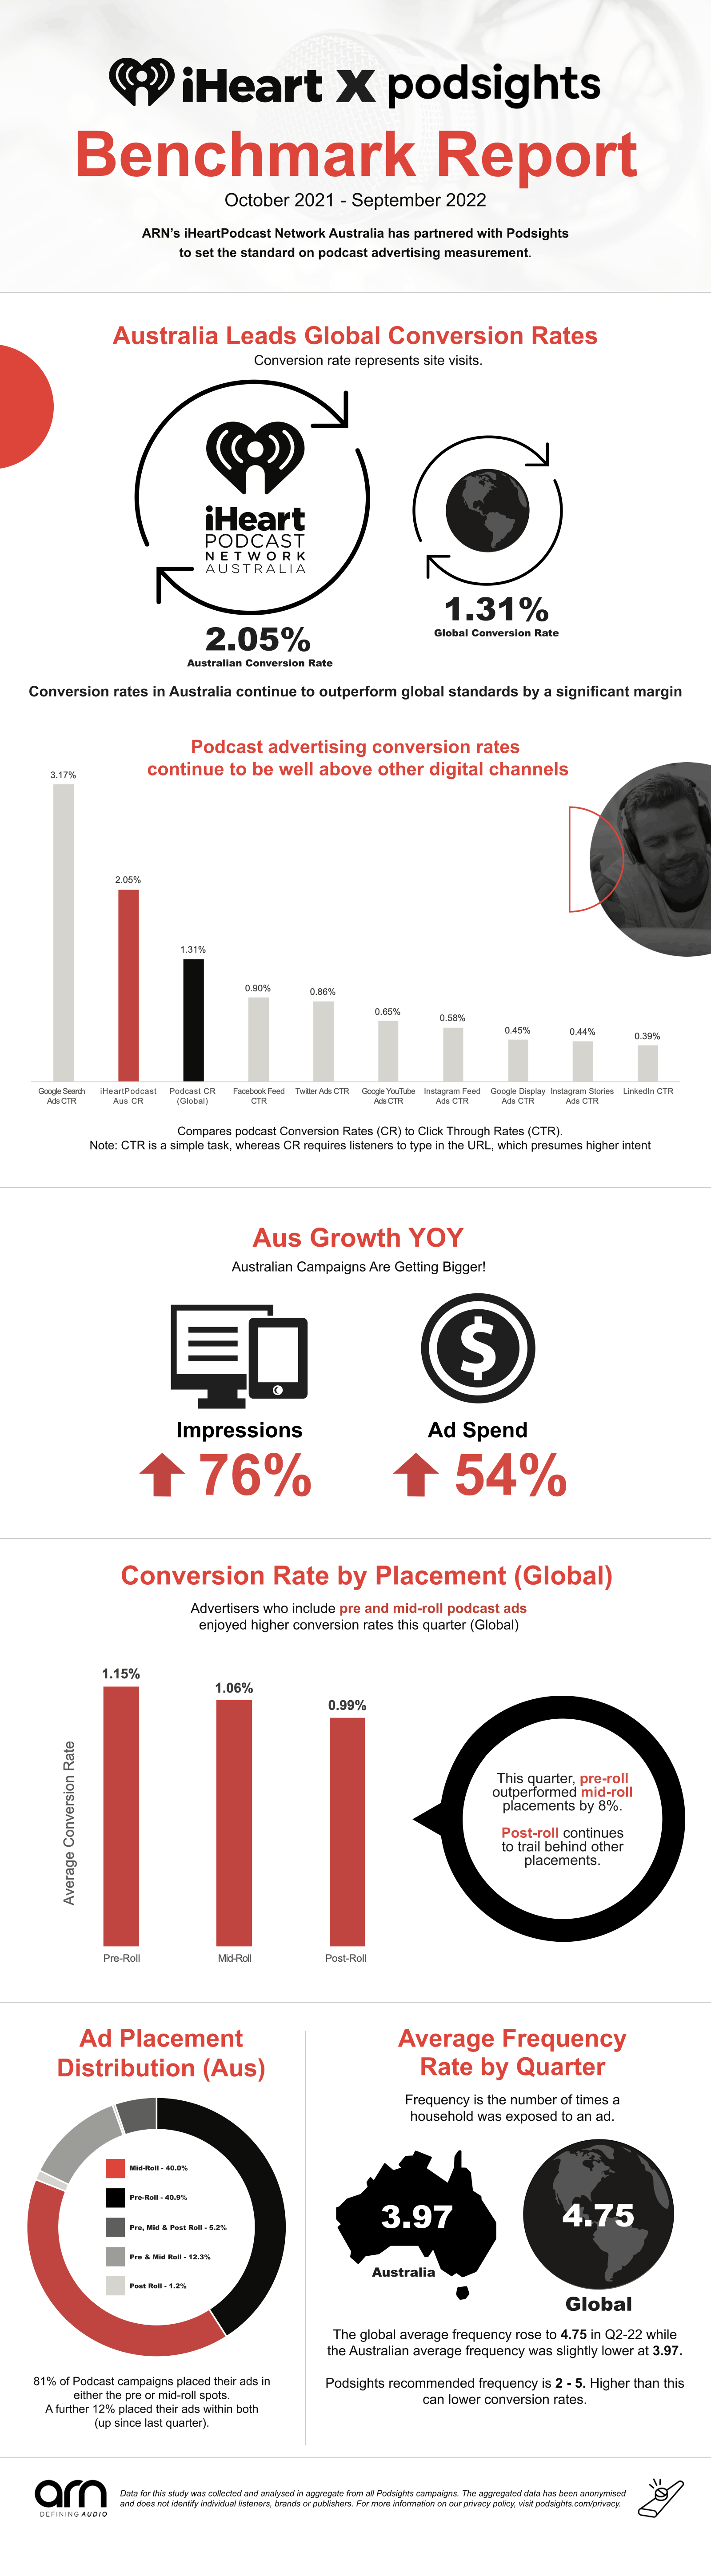 The report infographic